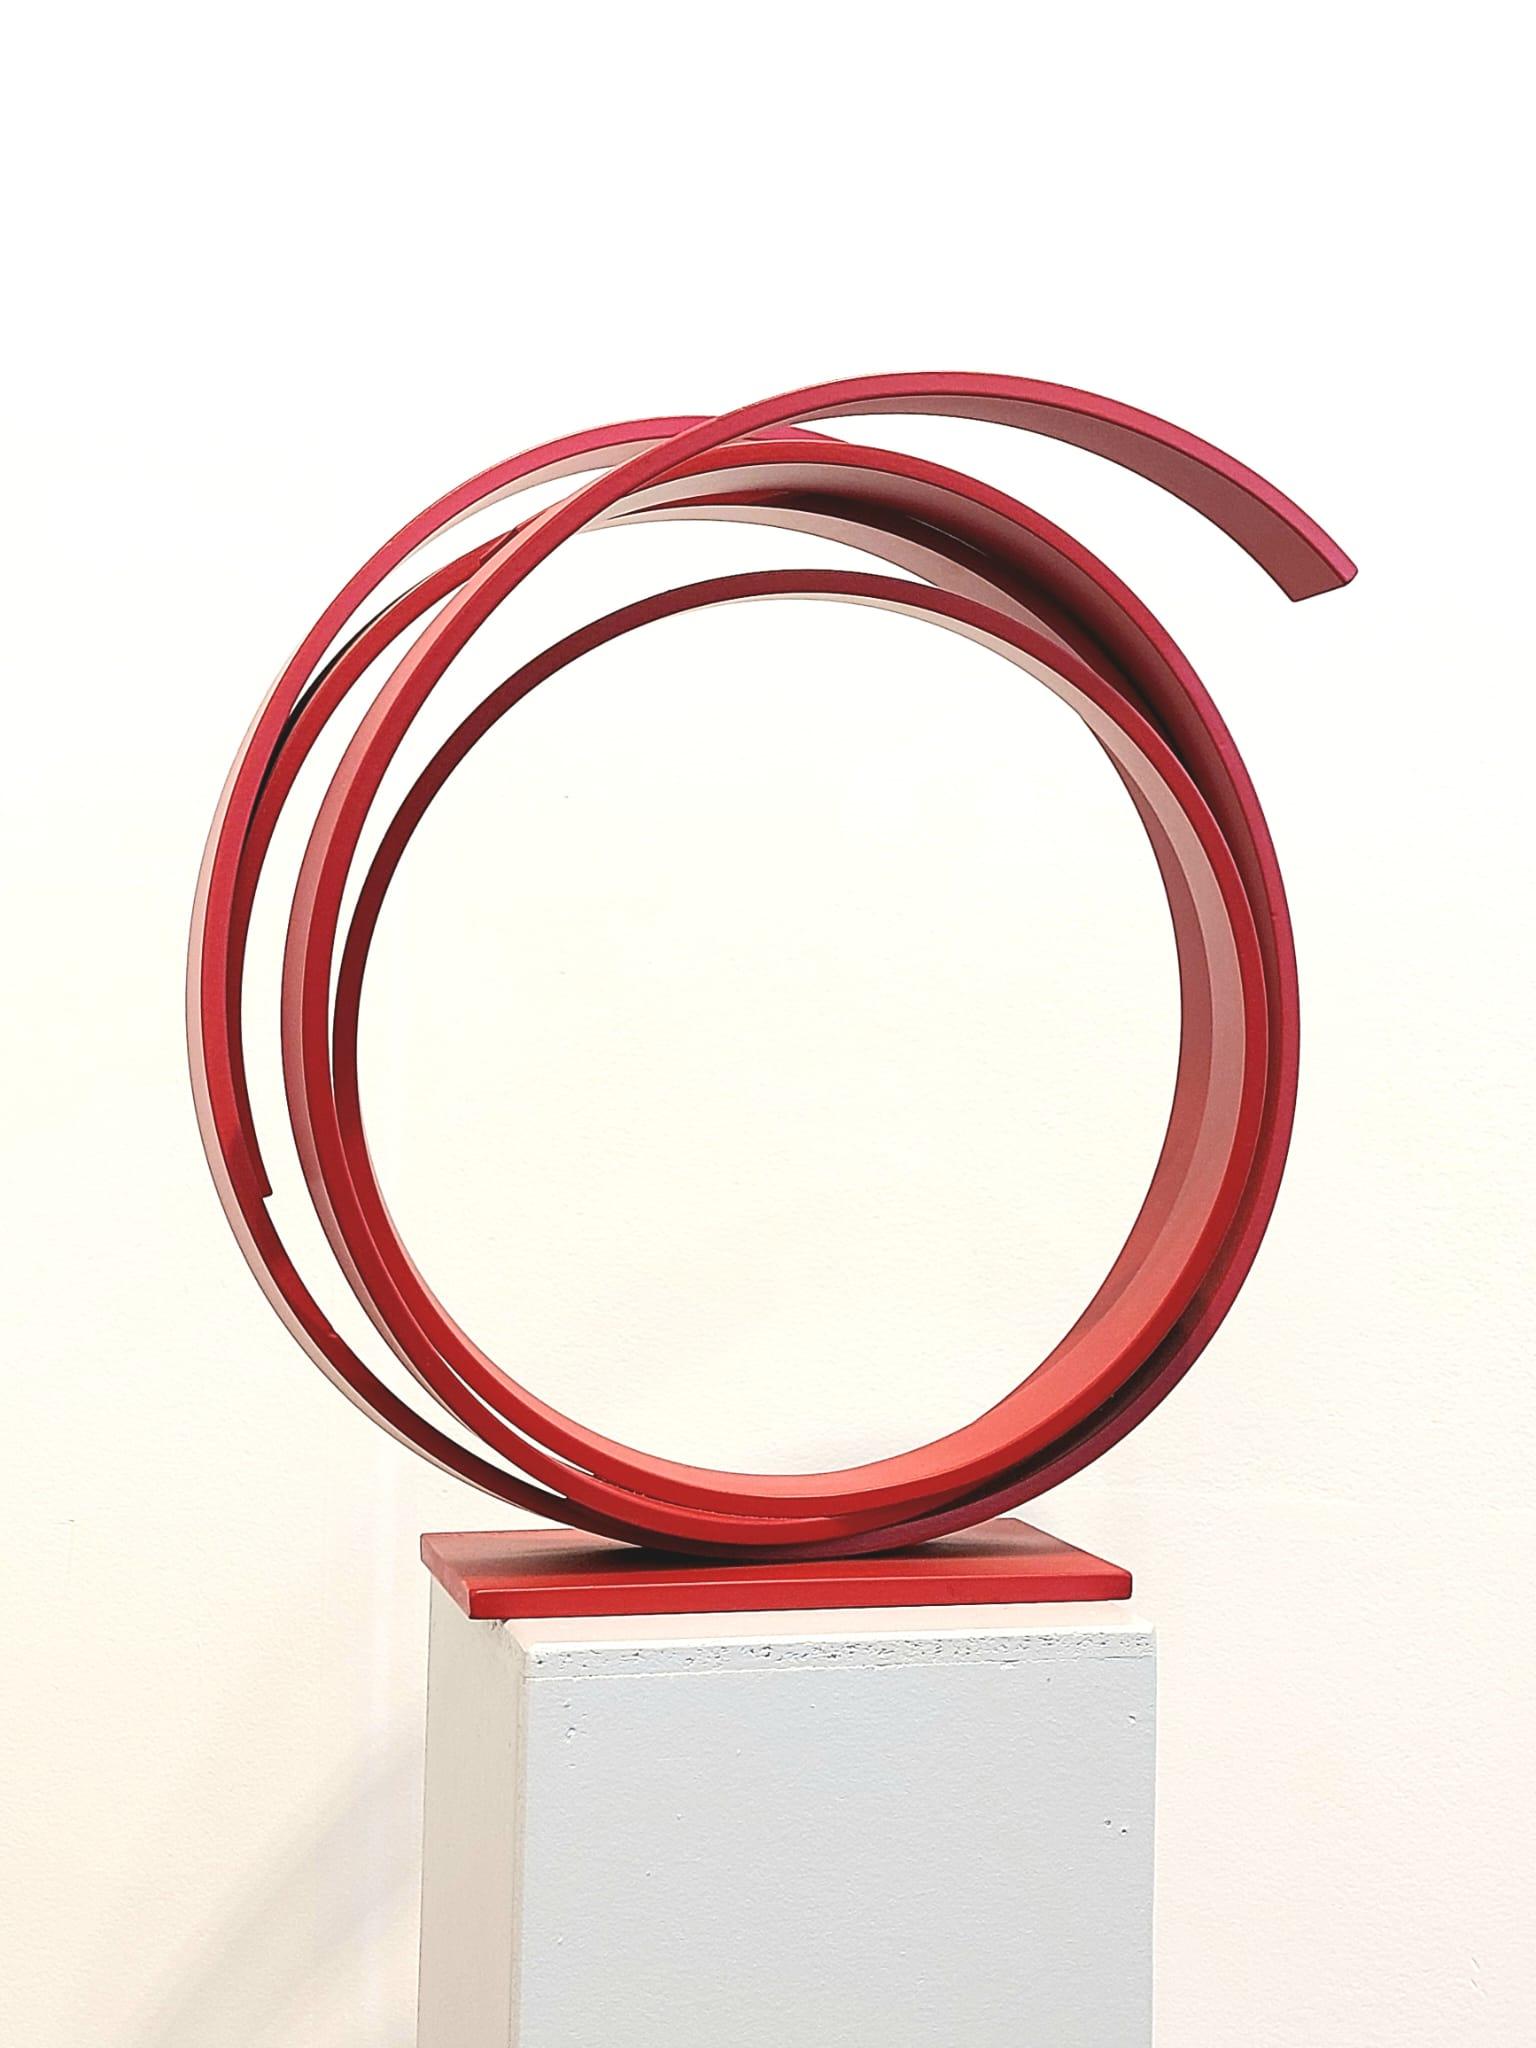 Small Red Orbit by Kuno Vollet - Large Contemporary Round Orbit sculpture  For Sale 1